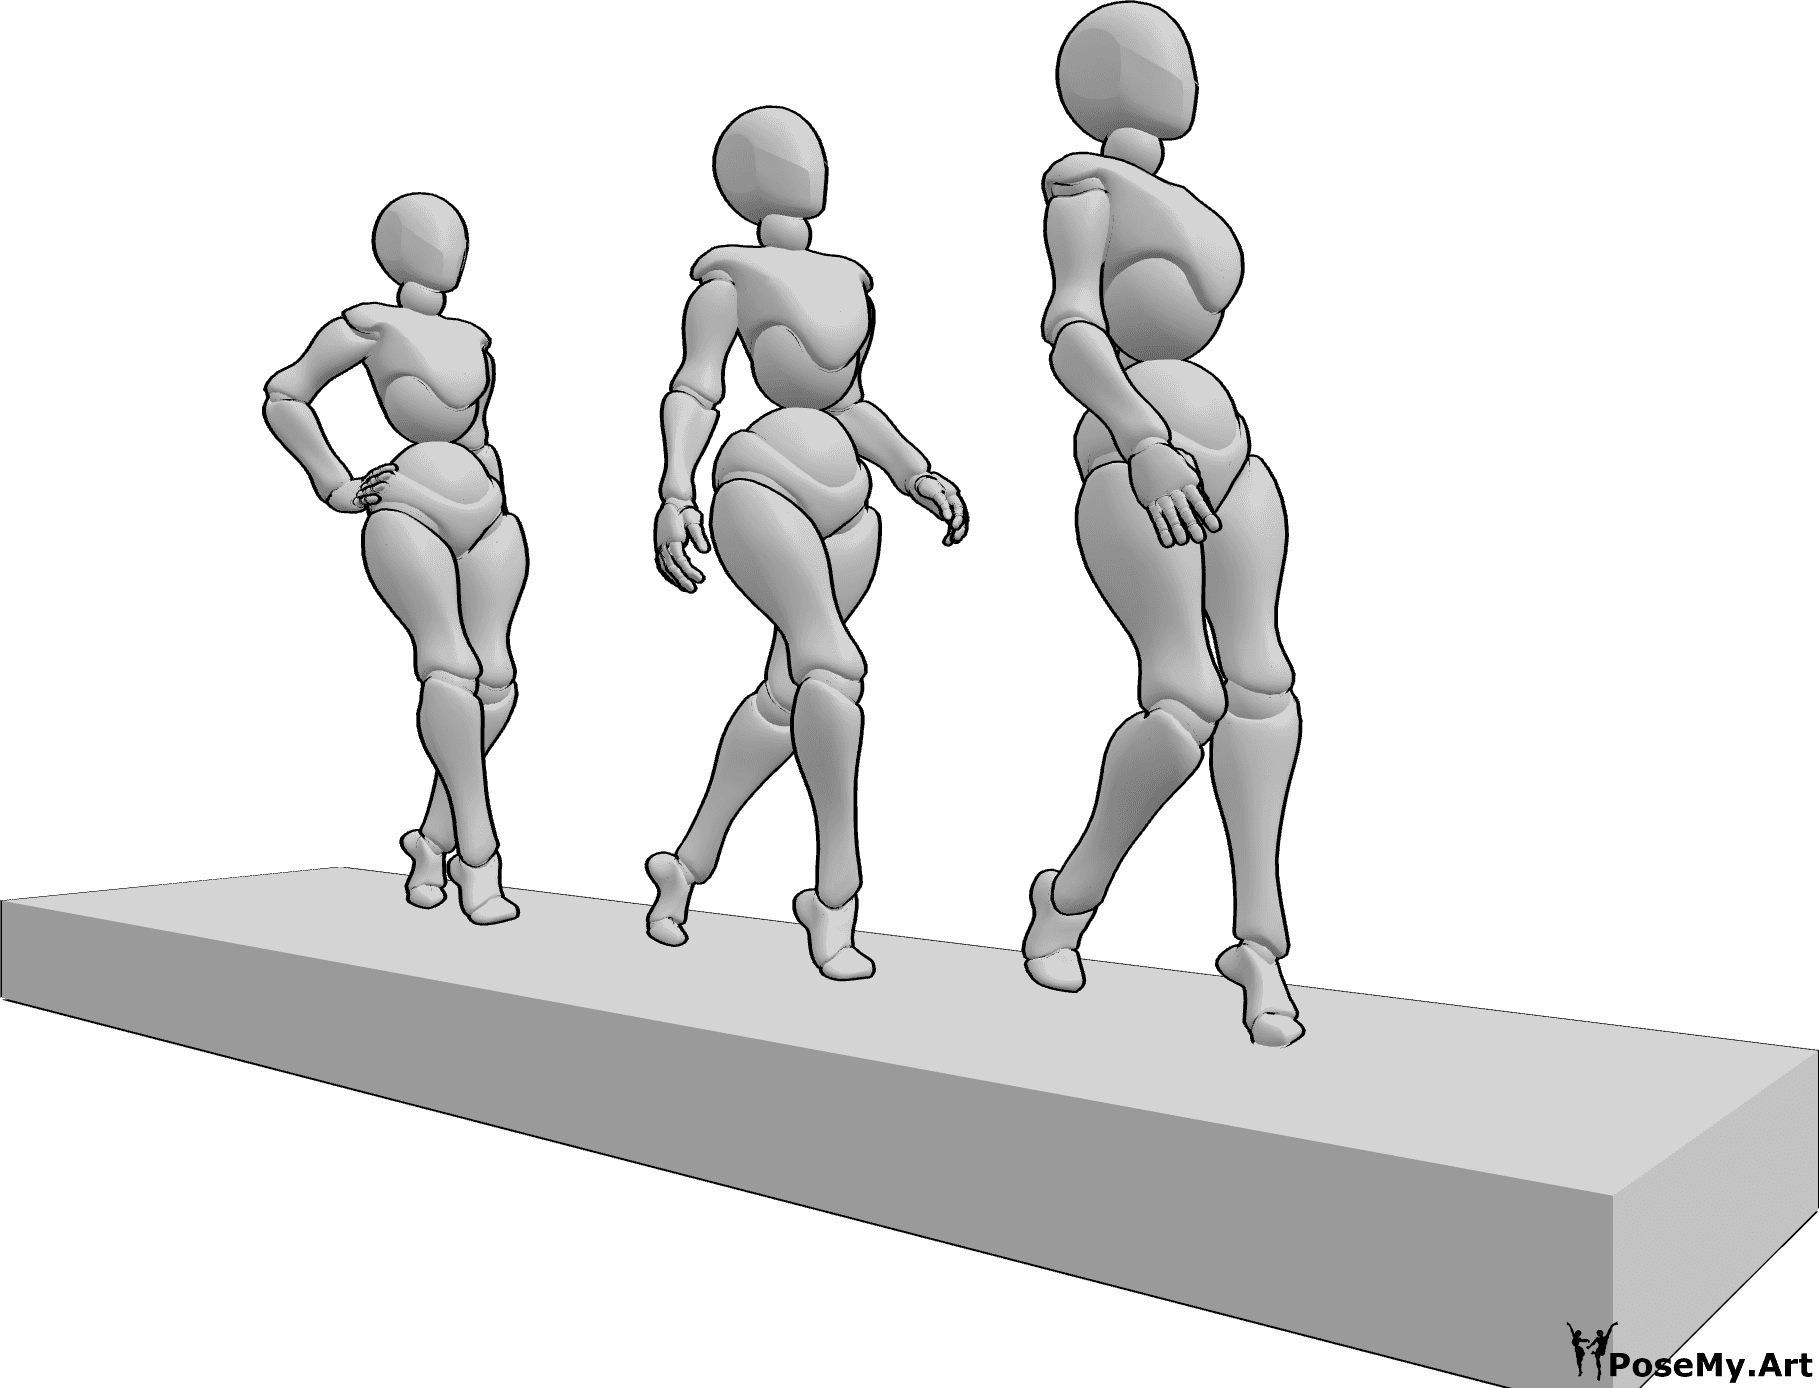 Pose Reference - Catwalk high heels pose - Female model is walking on the catwalk in high heels